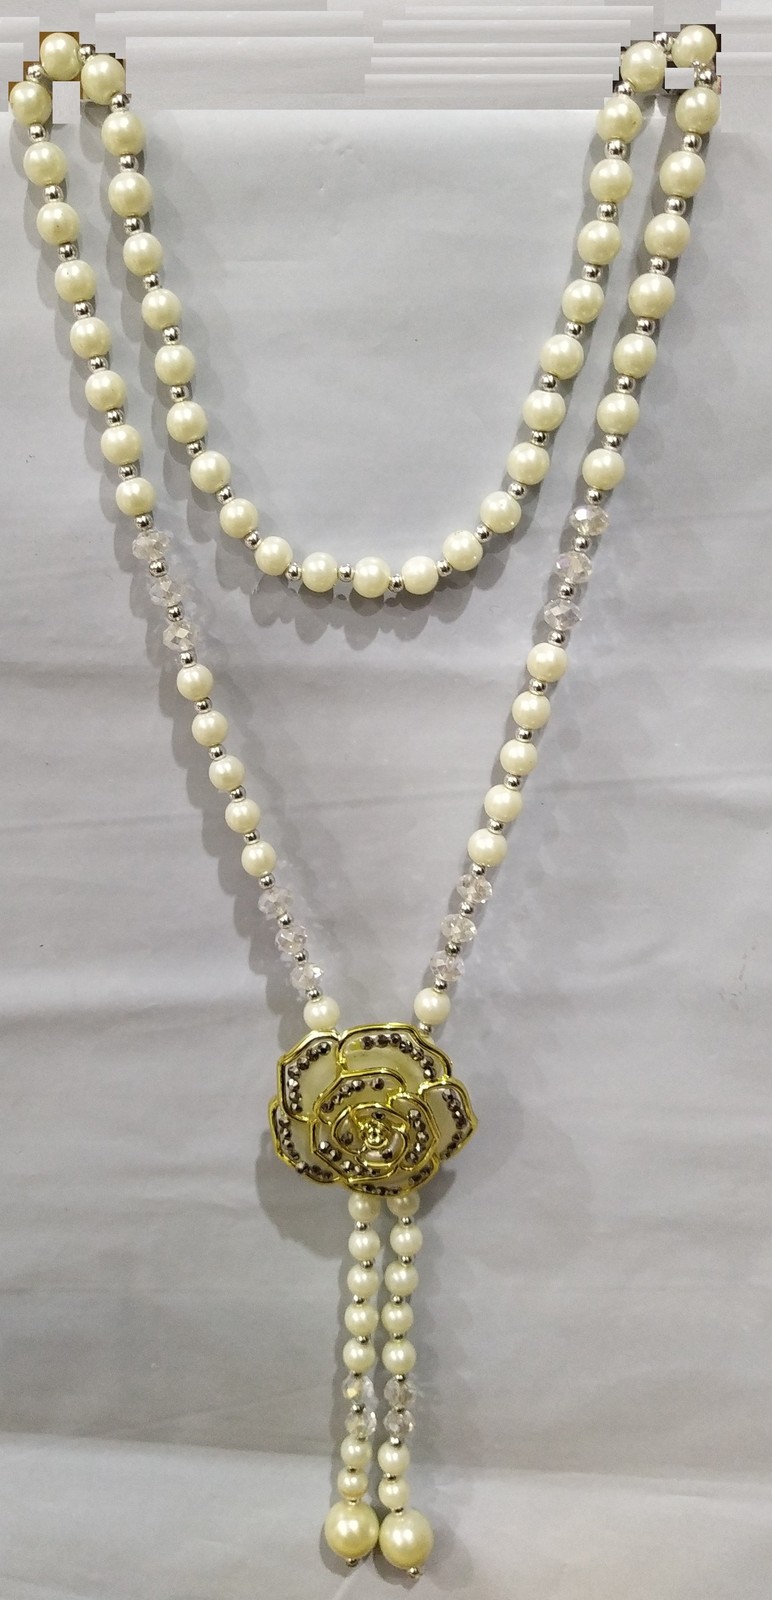 Pearl Necklace - $16.36